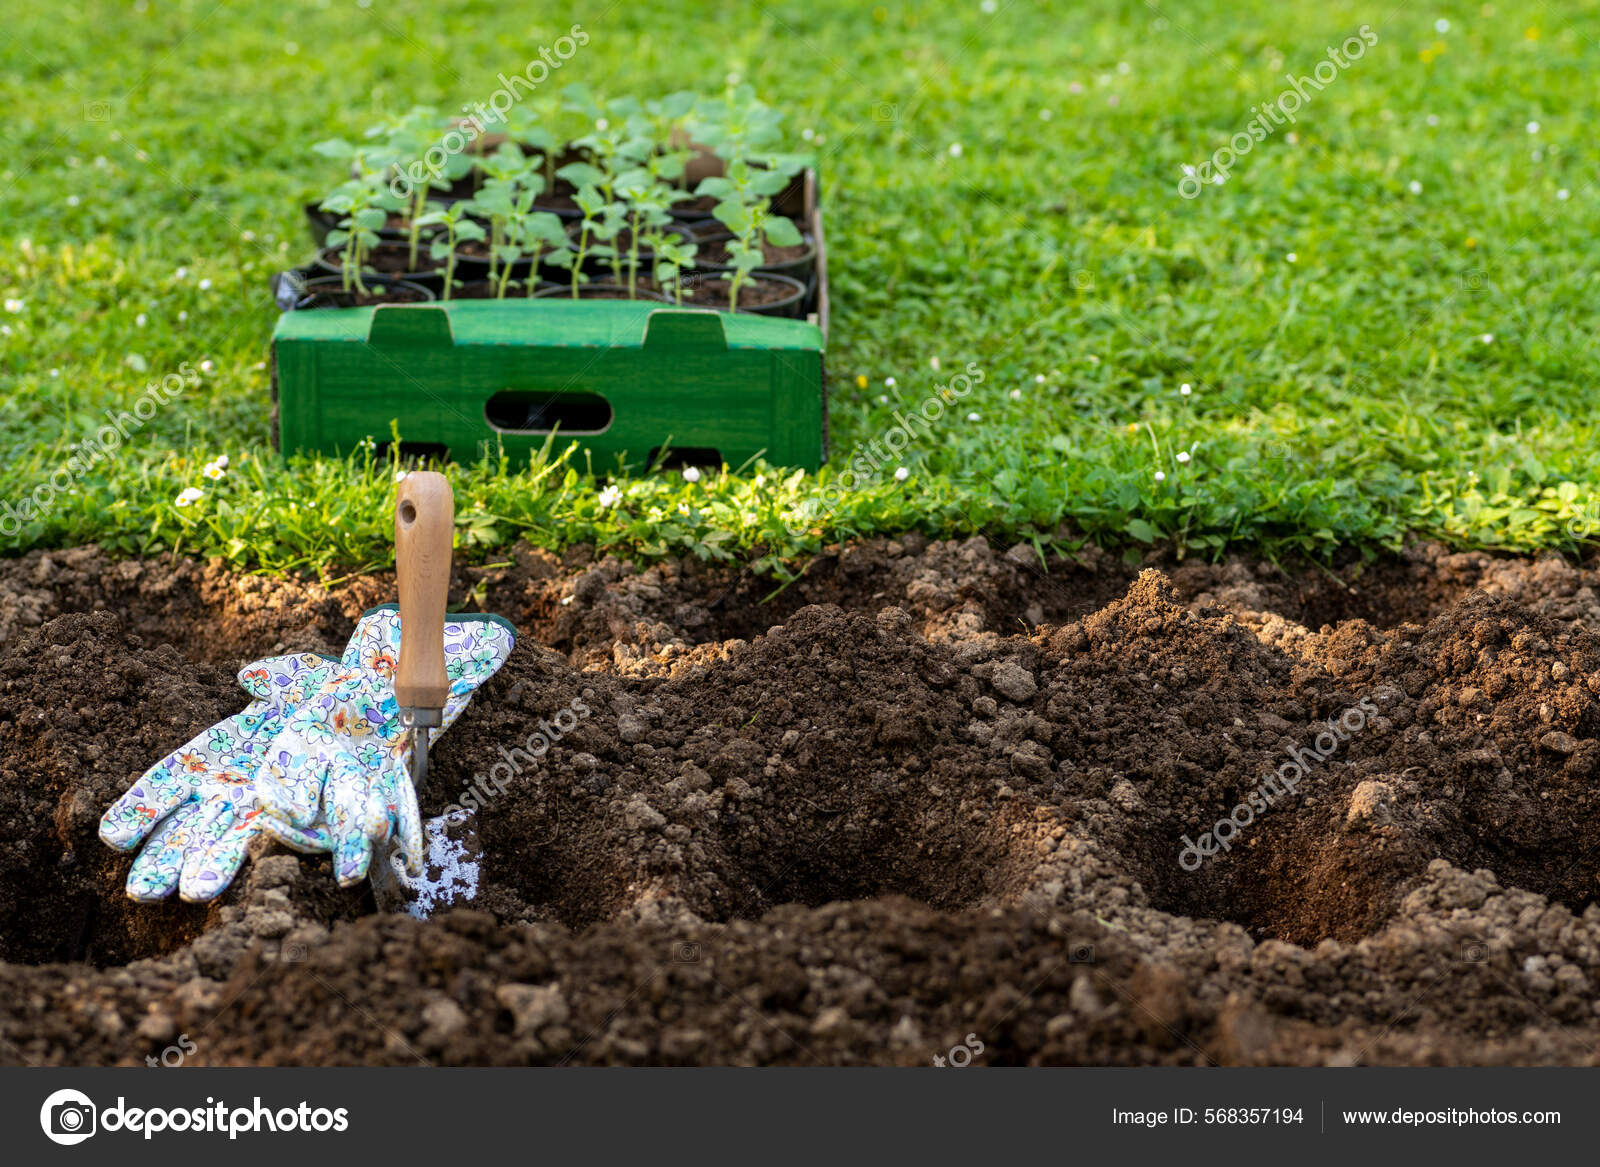 When and how to use compost in the garden or flowerbed